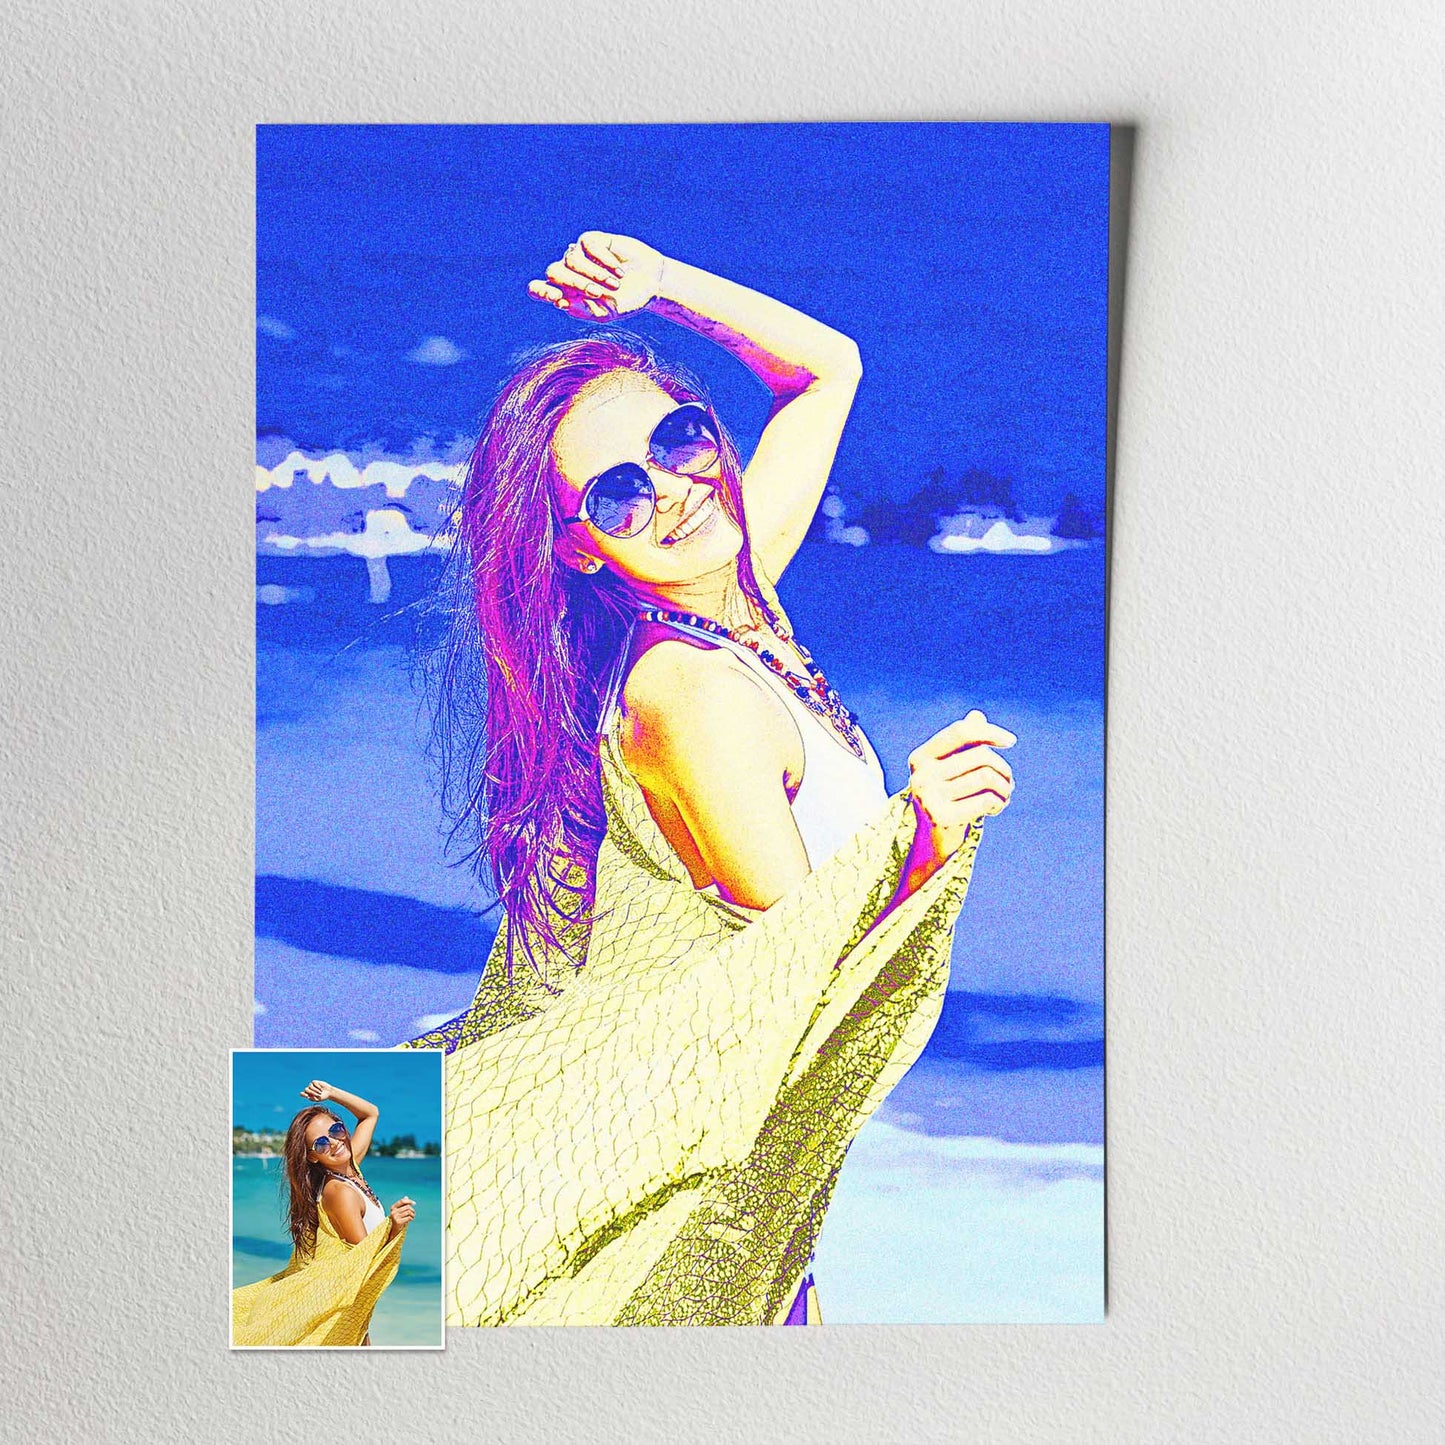 Elevate your home decor with our Personalised Blue & Purple Print. Crafted from your photo, it features the mesmerizing blue and purple hues with a trendy texture effect. The vibrant and cool colors radiate excitement and joy